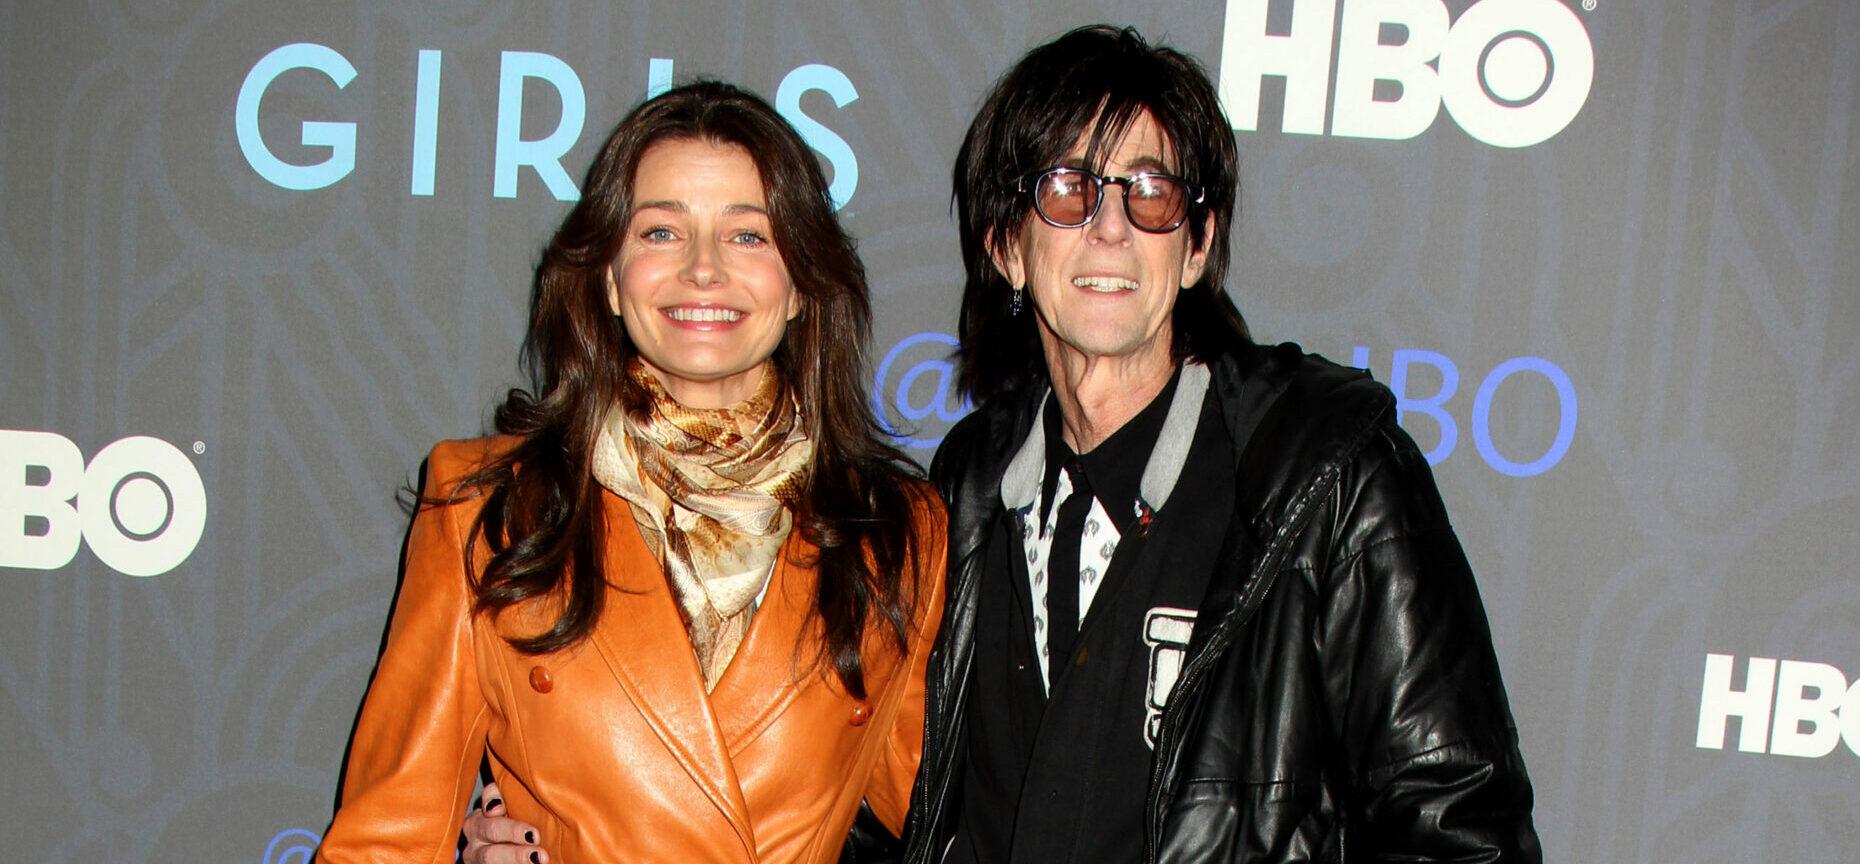 Ric Ocasek lead singer of The Cars has died at the age of 70 after being found unresponsive by estranged wife Paulina Porizkova in his Manhattan townhouse.